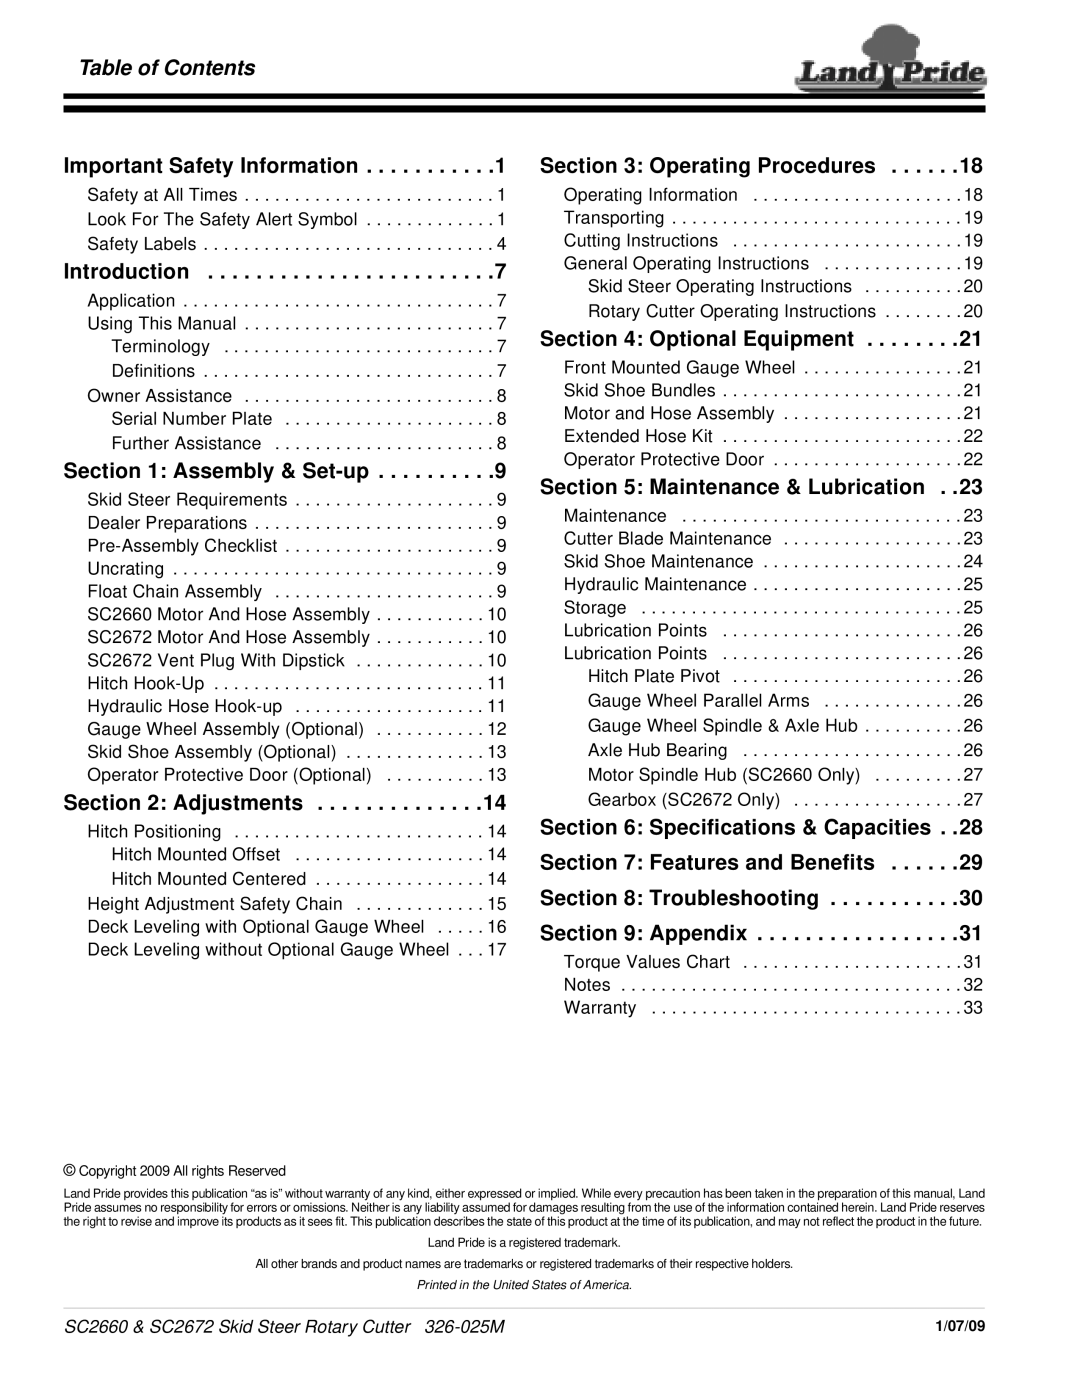 Land Pride SC2660, SC2672 Table of Contents, Important Safety Information, Introduction, Assembly & Set-up, Adjustments 